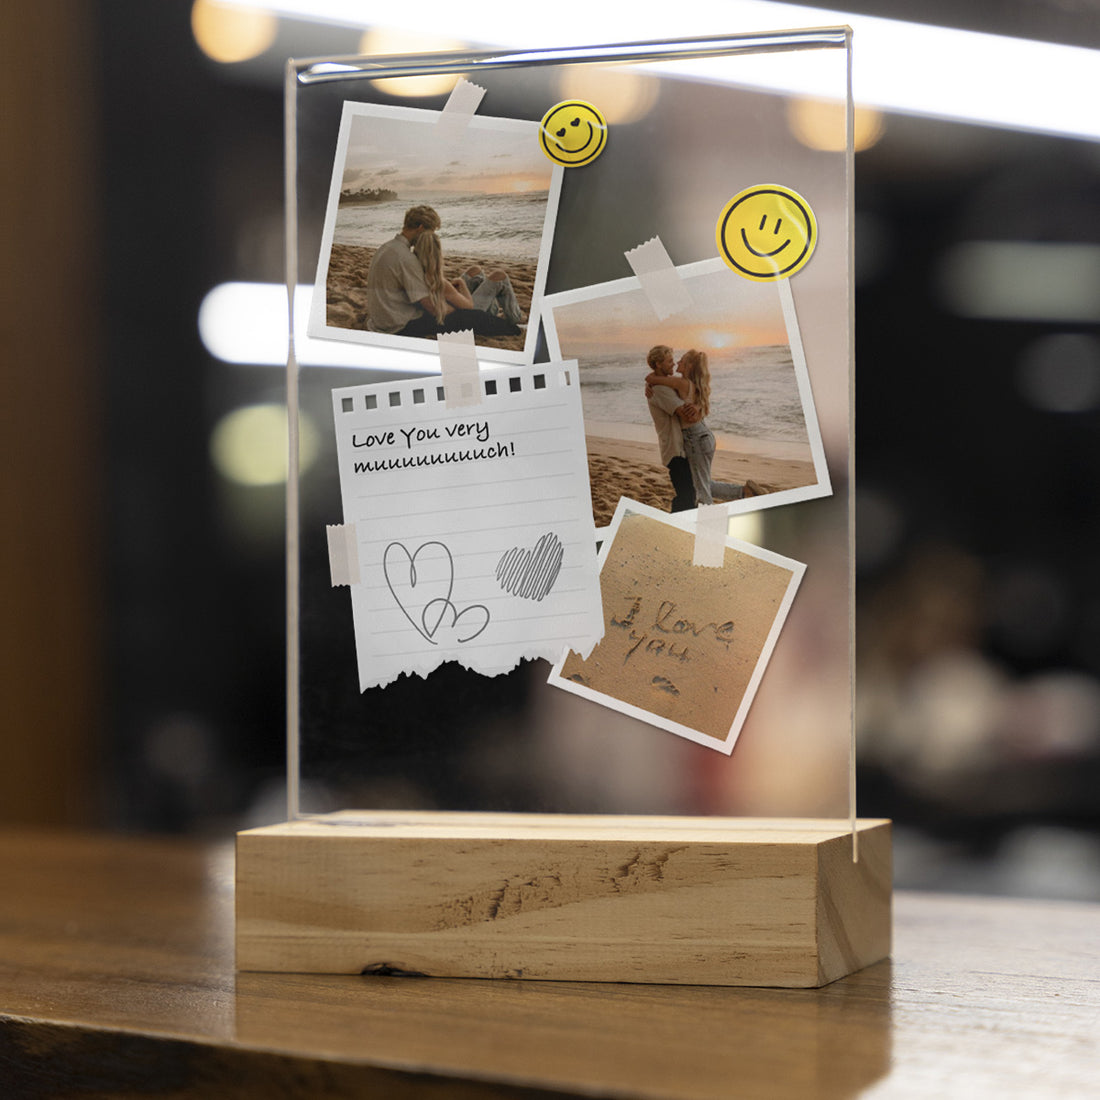 Personalized Transparent Plaque with Polaroid Photos and Note